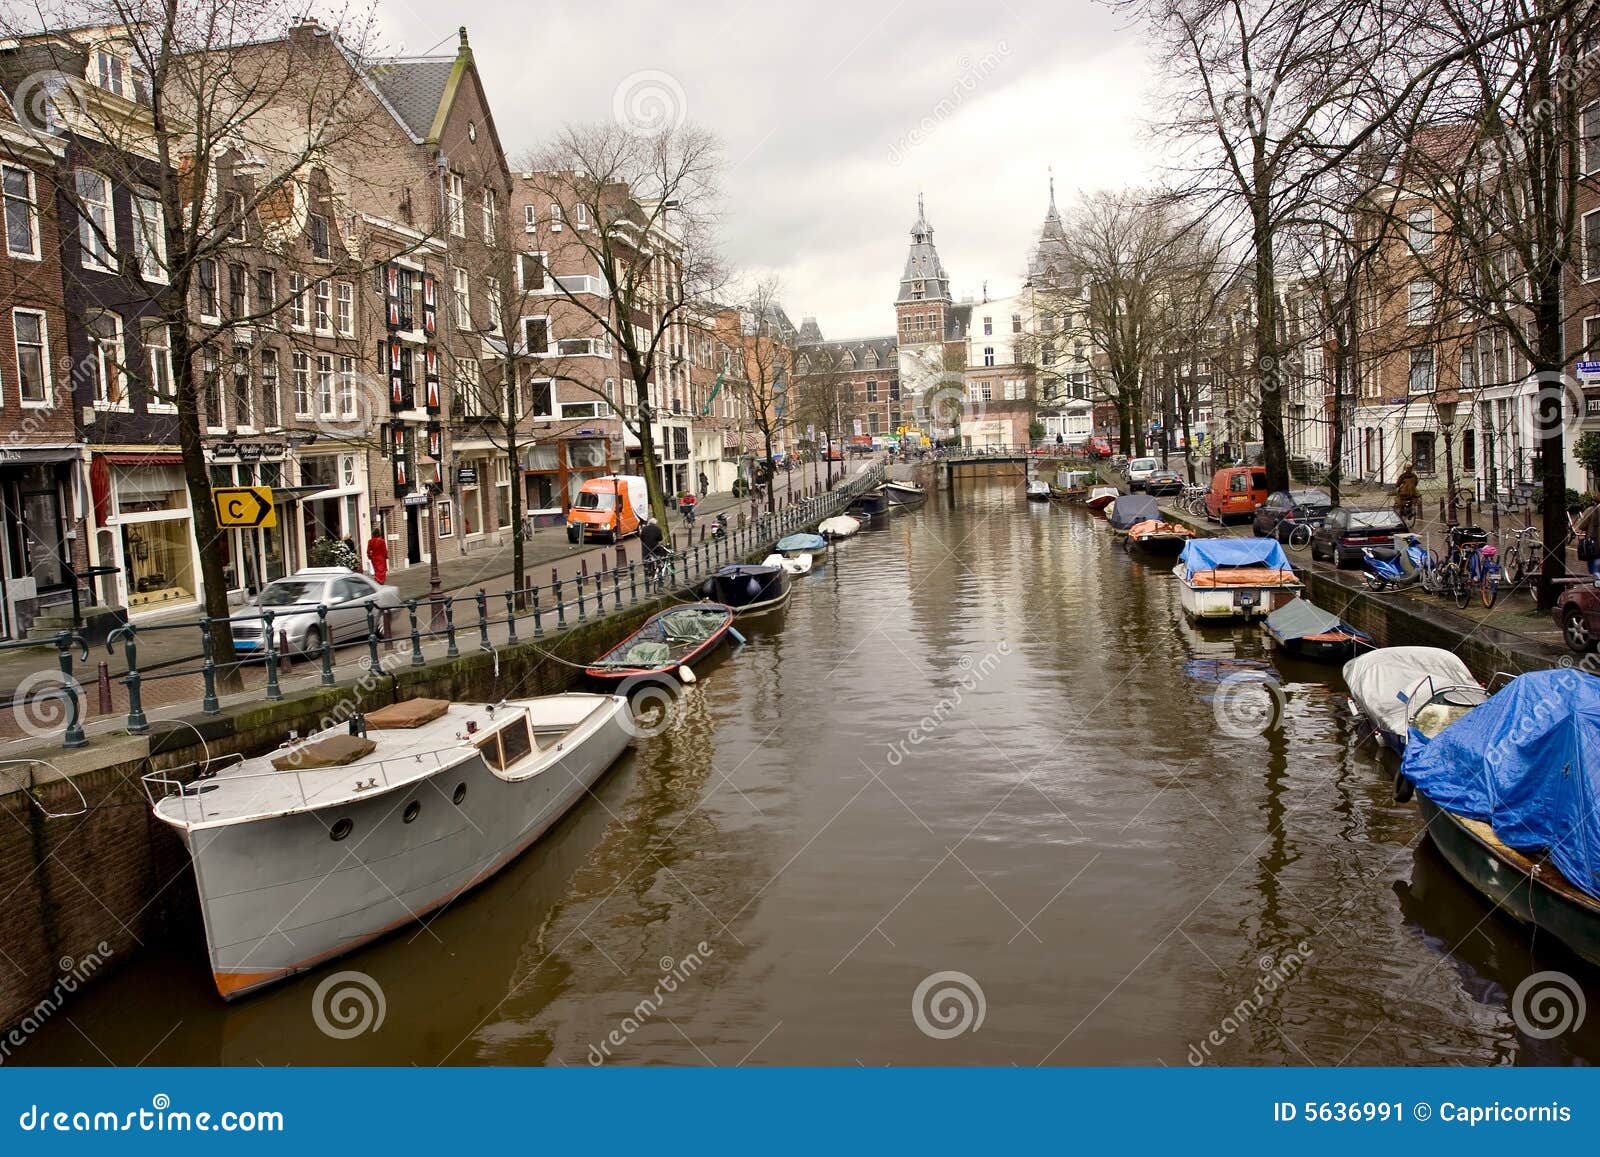 The Best Hotels with Canal Views in Amsterdam | Fodor's Travel